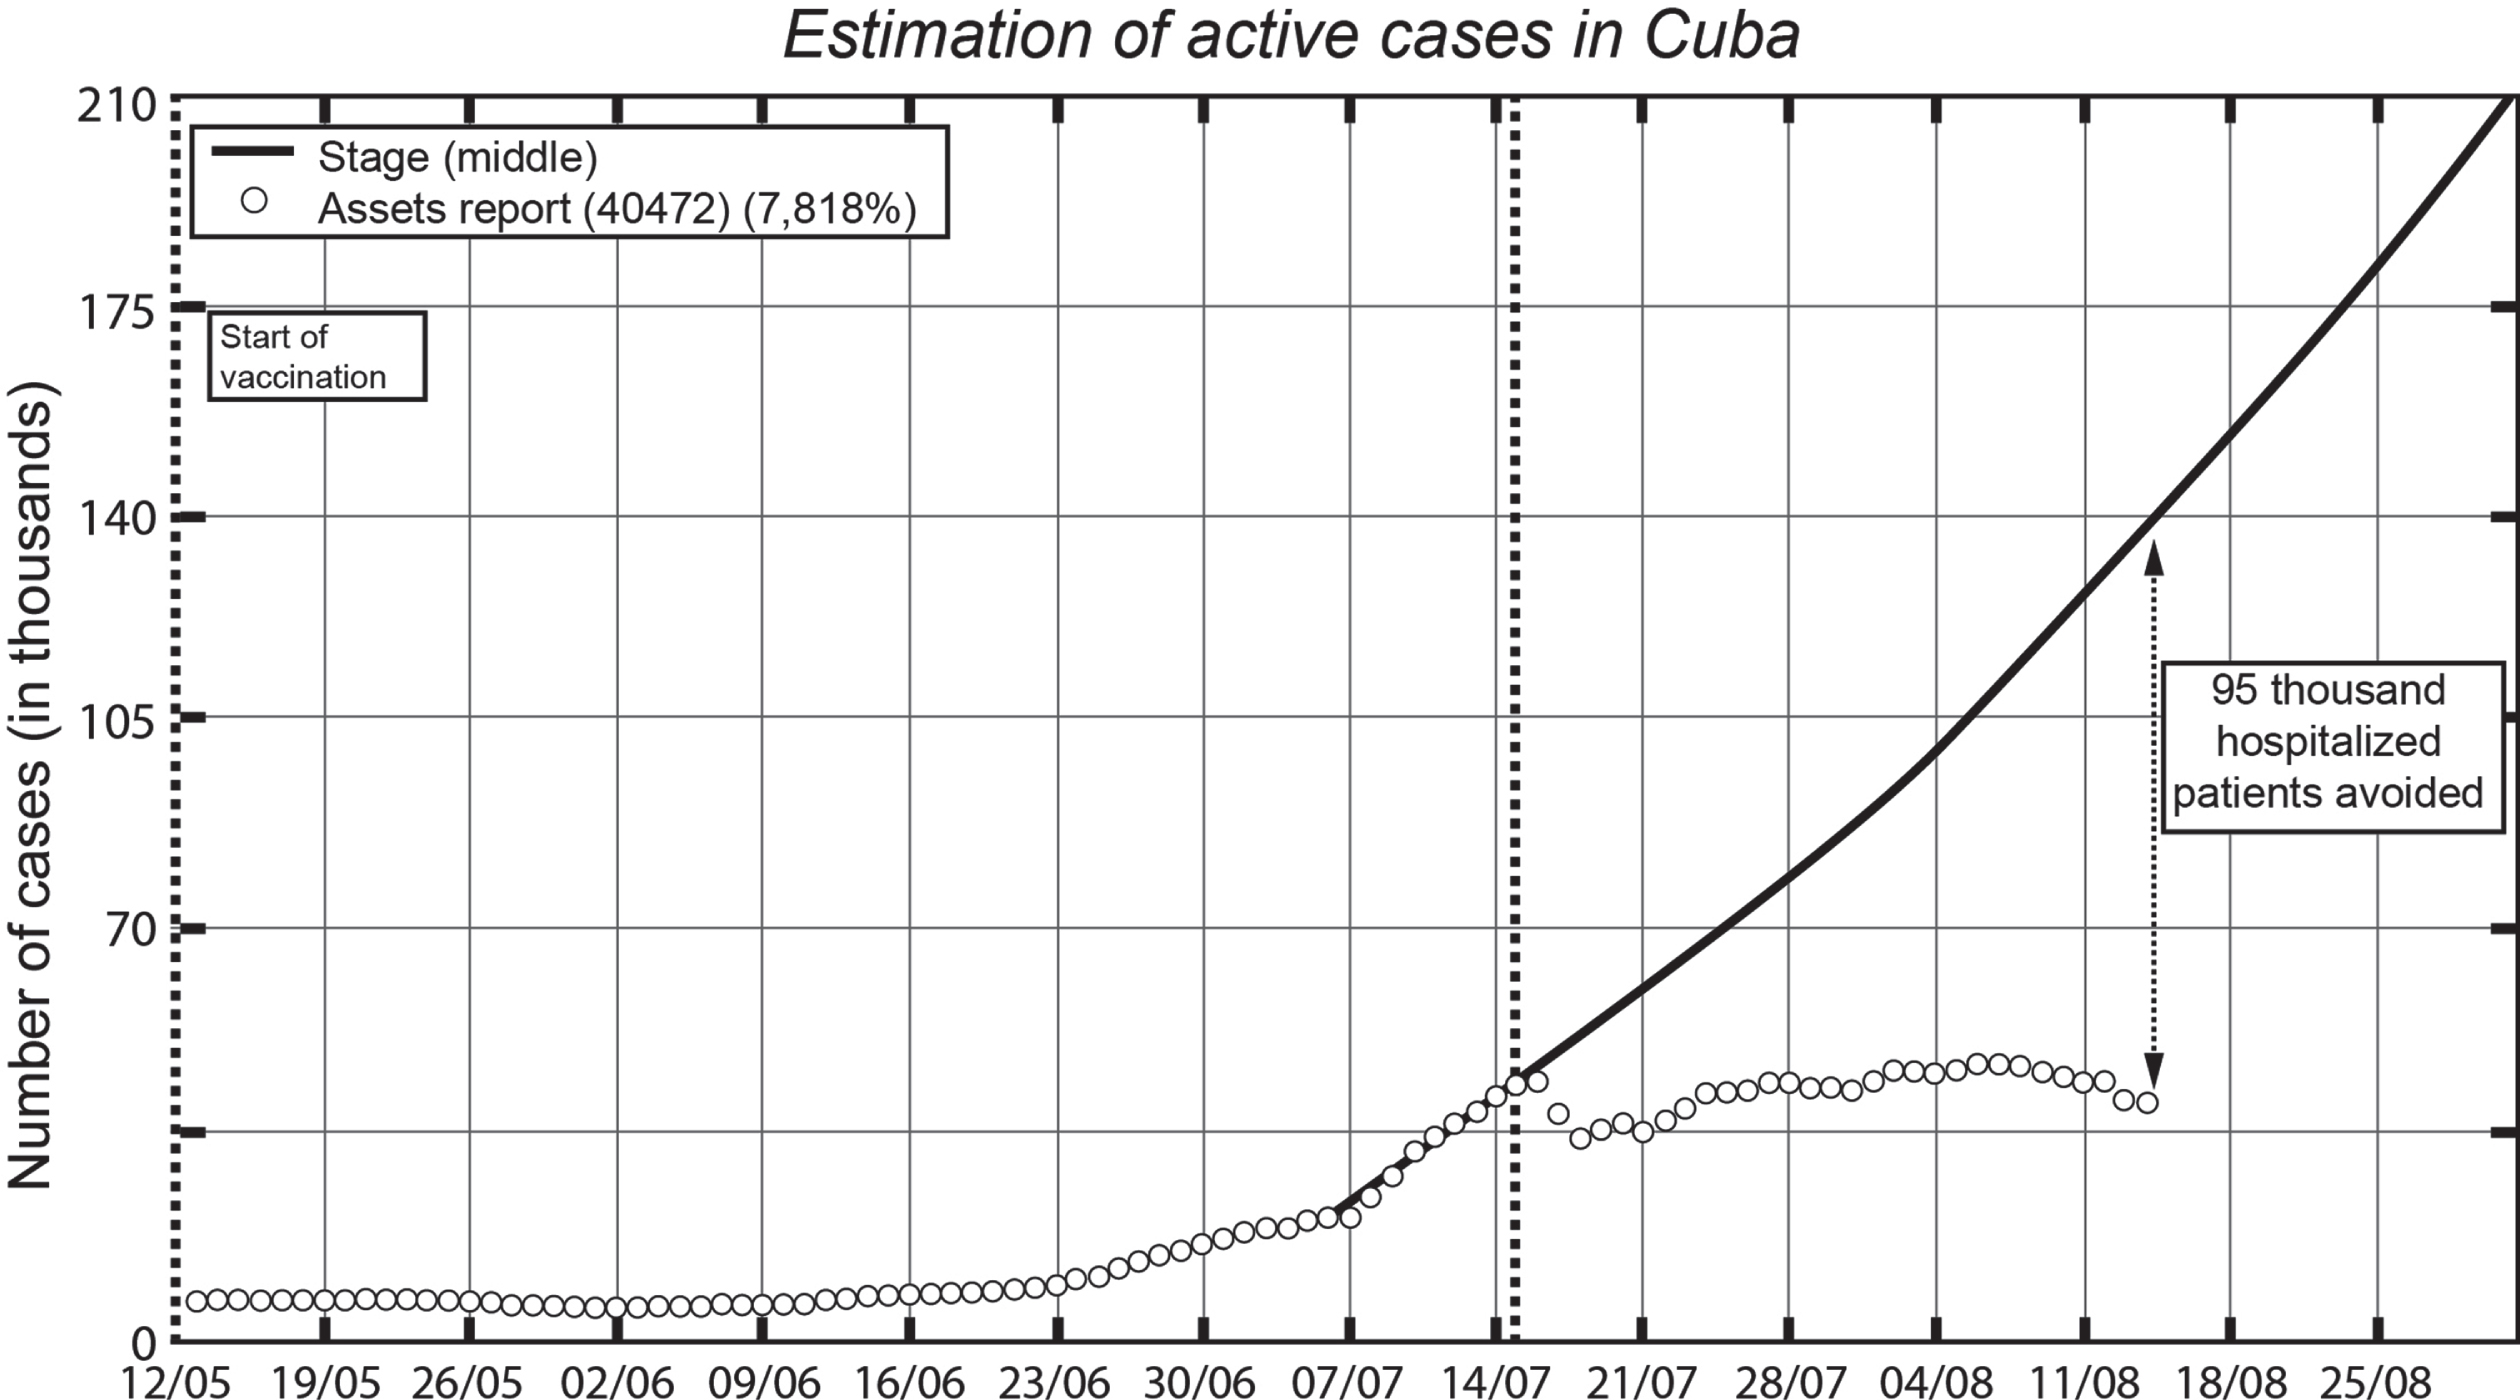 Estimation of active and accumulated real cases.